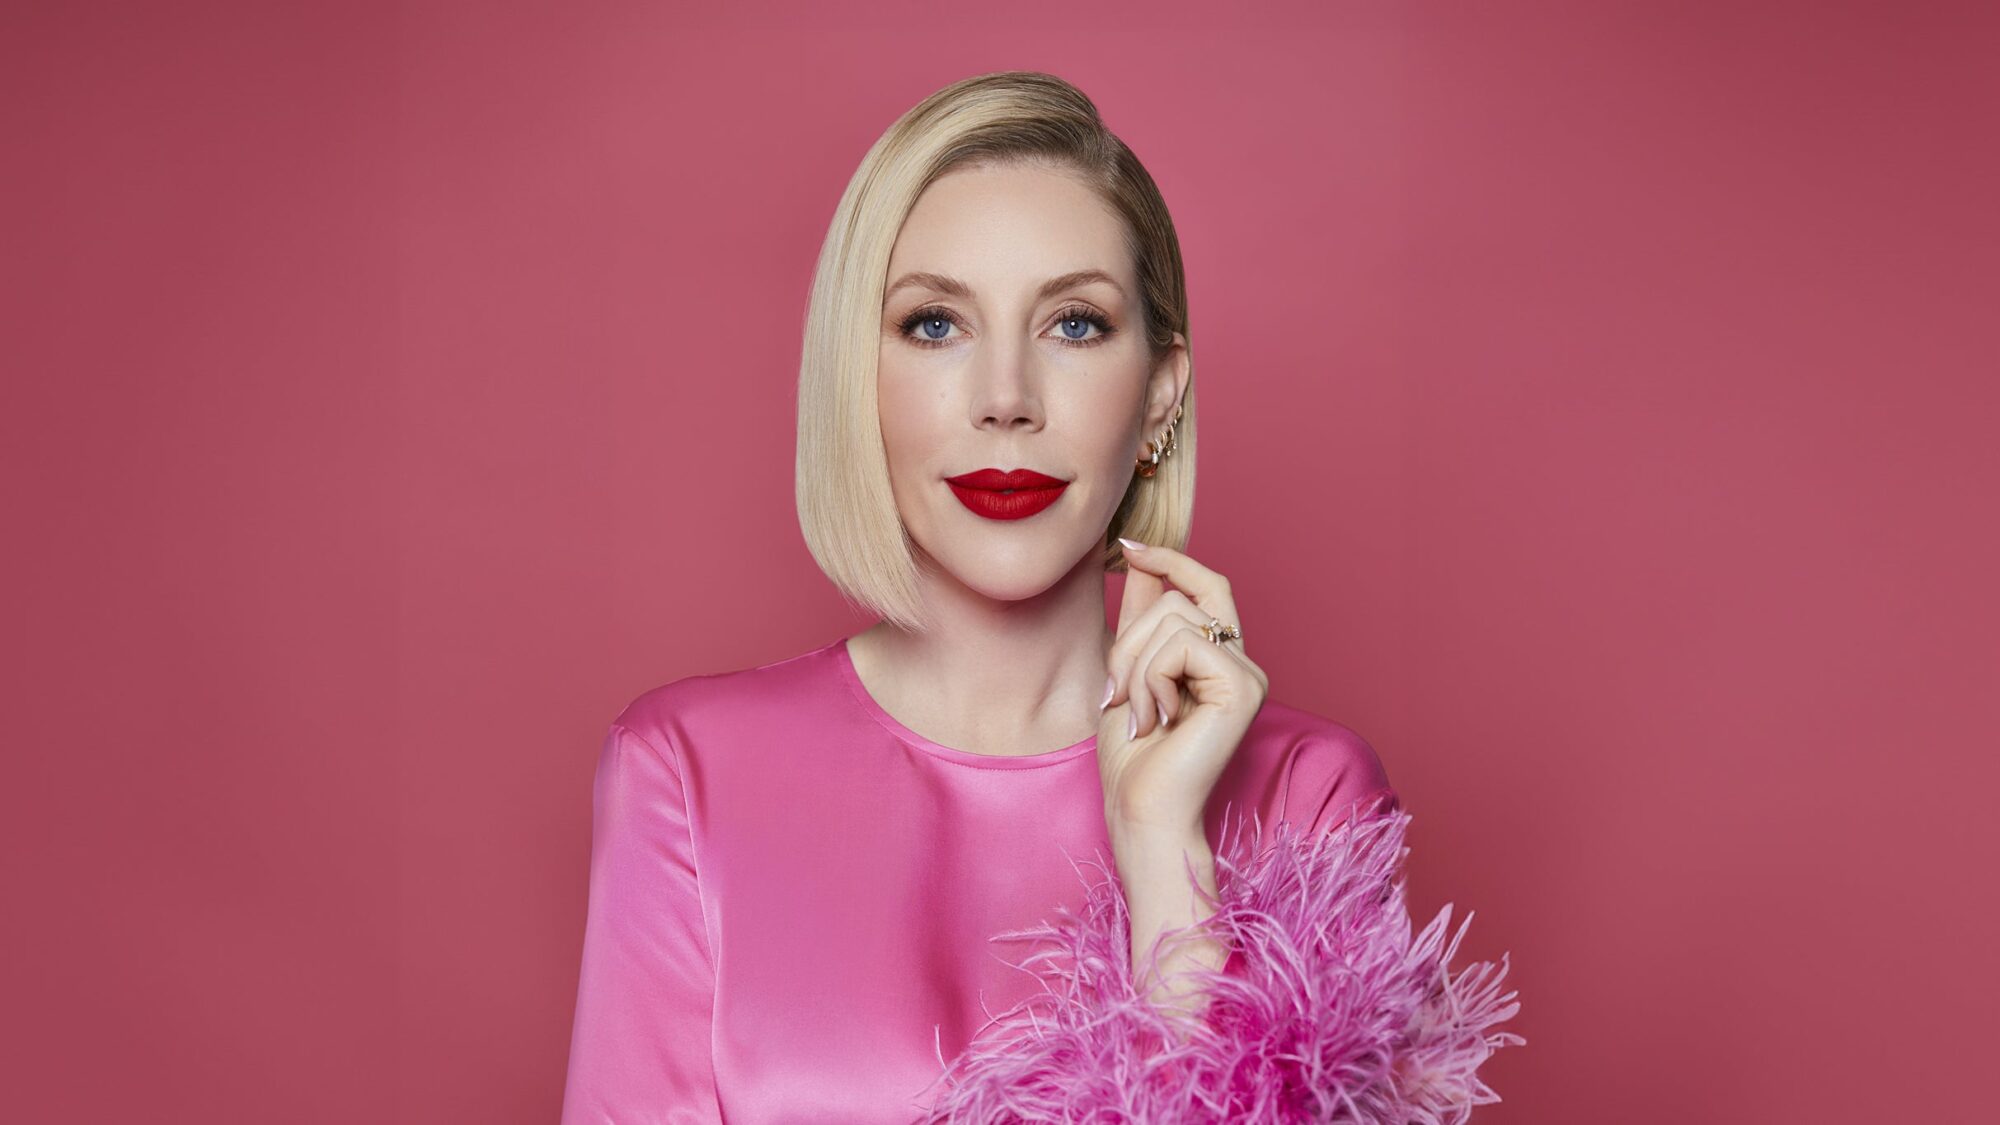 Image name Katherine Ryan Battleaxe at Doncaster Dome Doncaster the 21 image from the post Katherine Ryan: Battleaxe at York Barbican, York in Yorkshire.com.